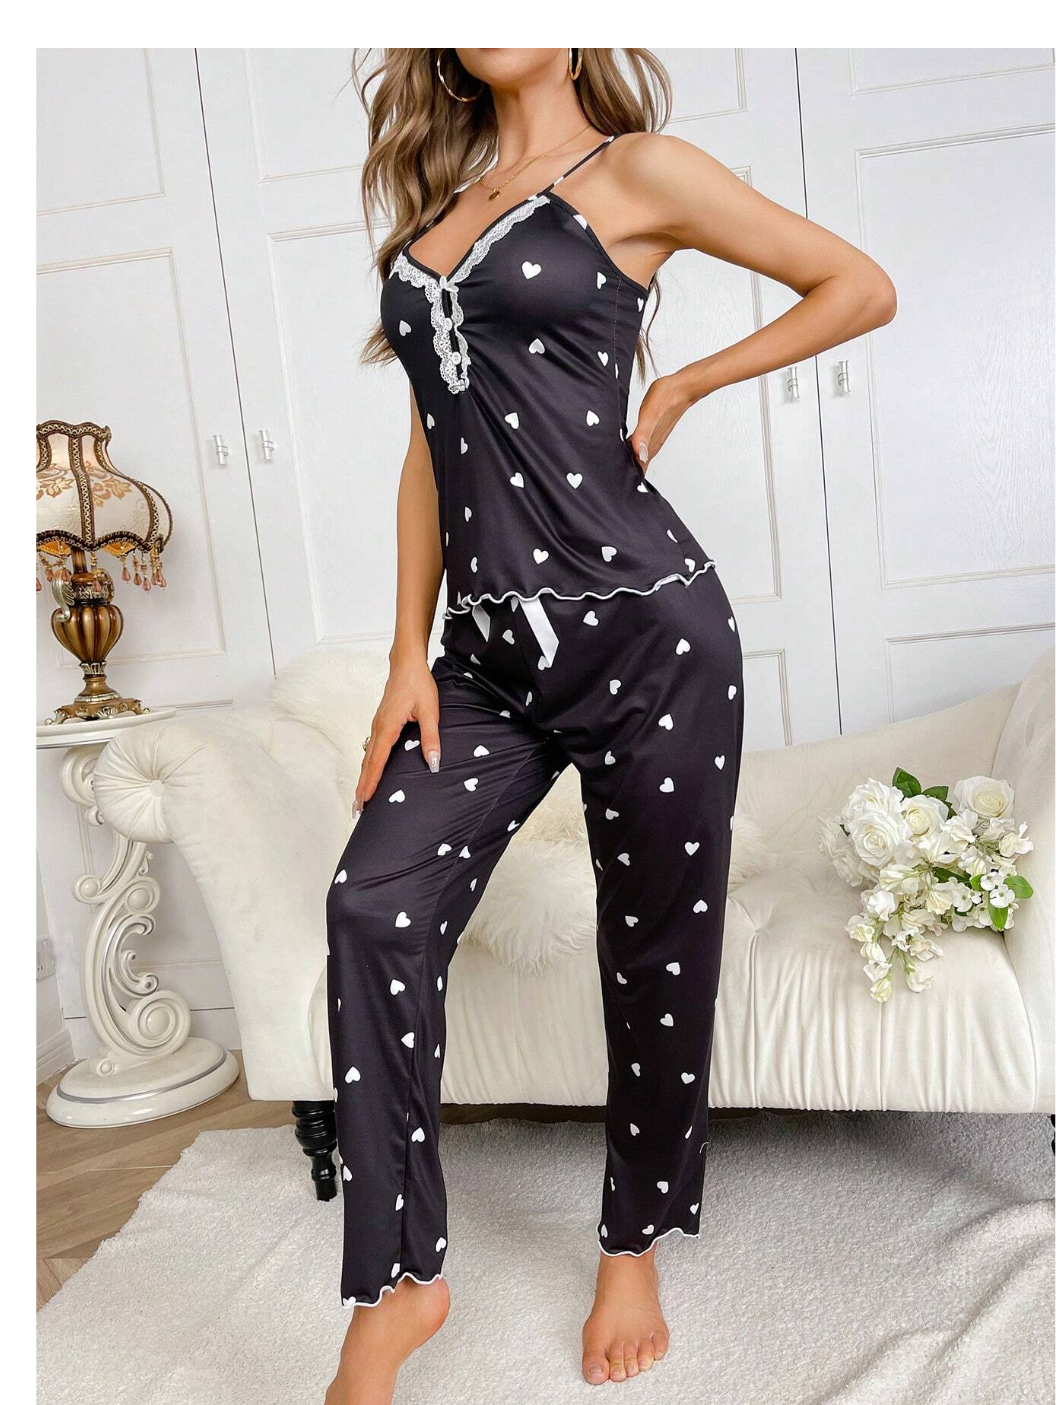 Sweet Dreams: Heart Print Delight with Contrast Lace and Bow Front Cami PJ Set.